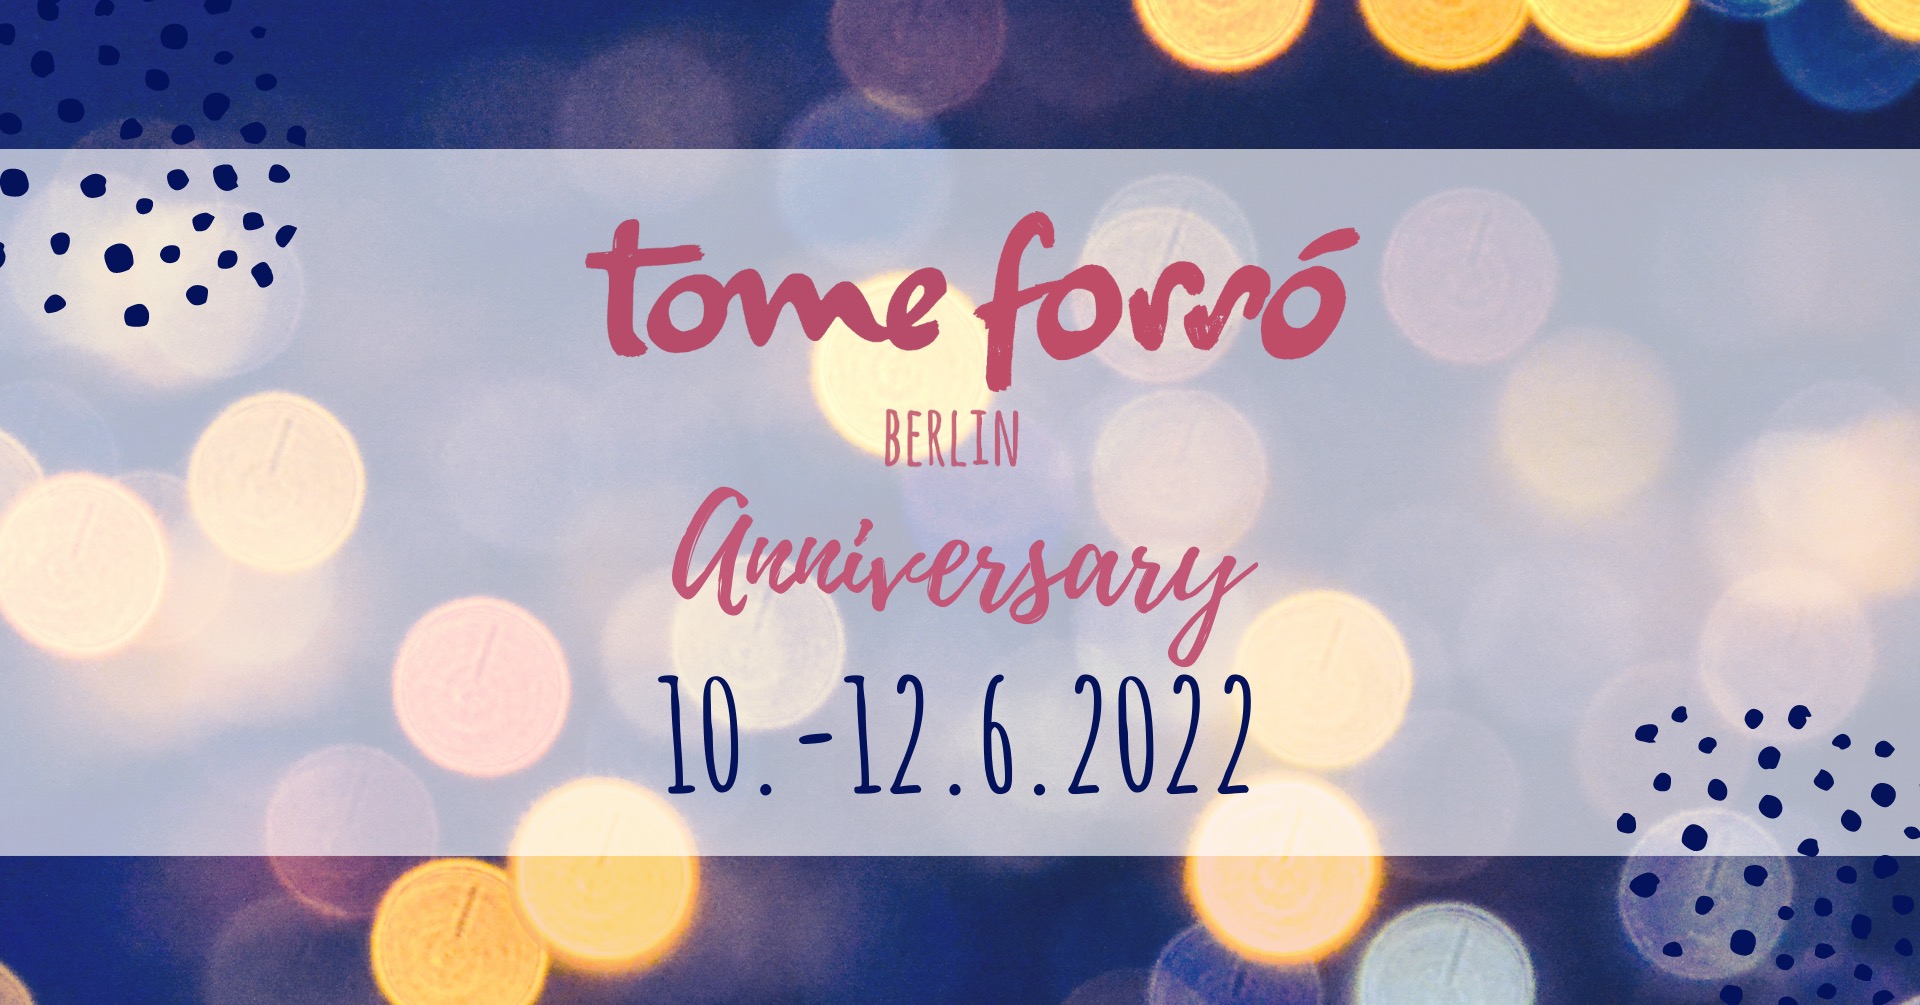 Tome Forró Berlin Anniversary 2022